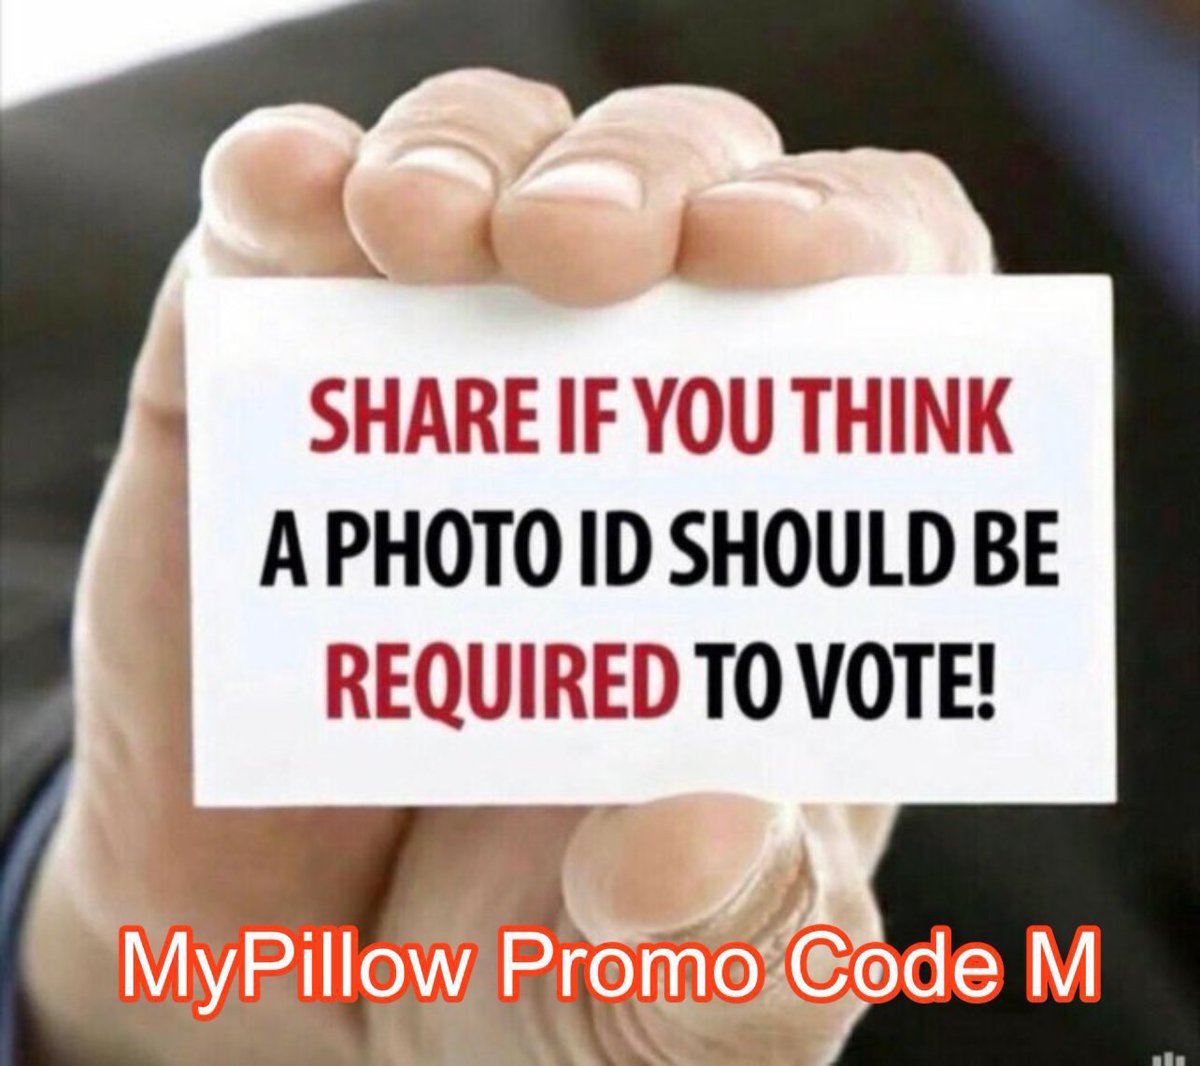 What’s to stop illegal immigrants in states that don’t require mandatory government identification to vote from voting? Retweet if you think government identification should be mandatory to vote.